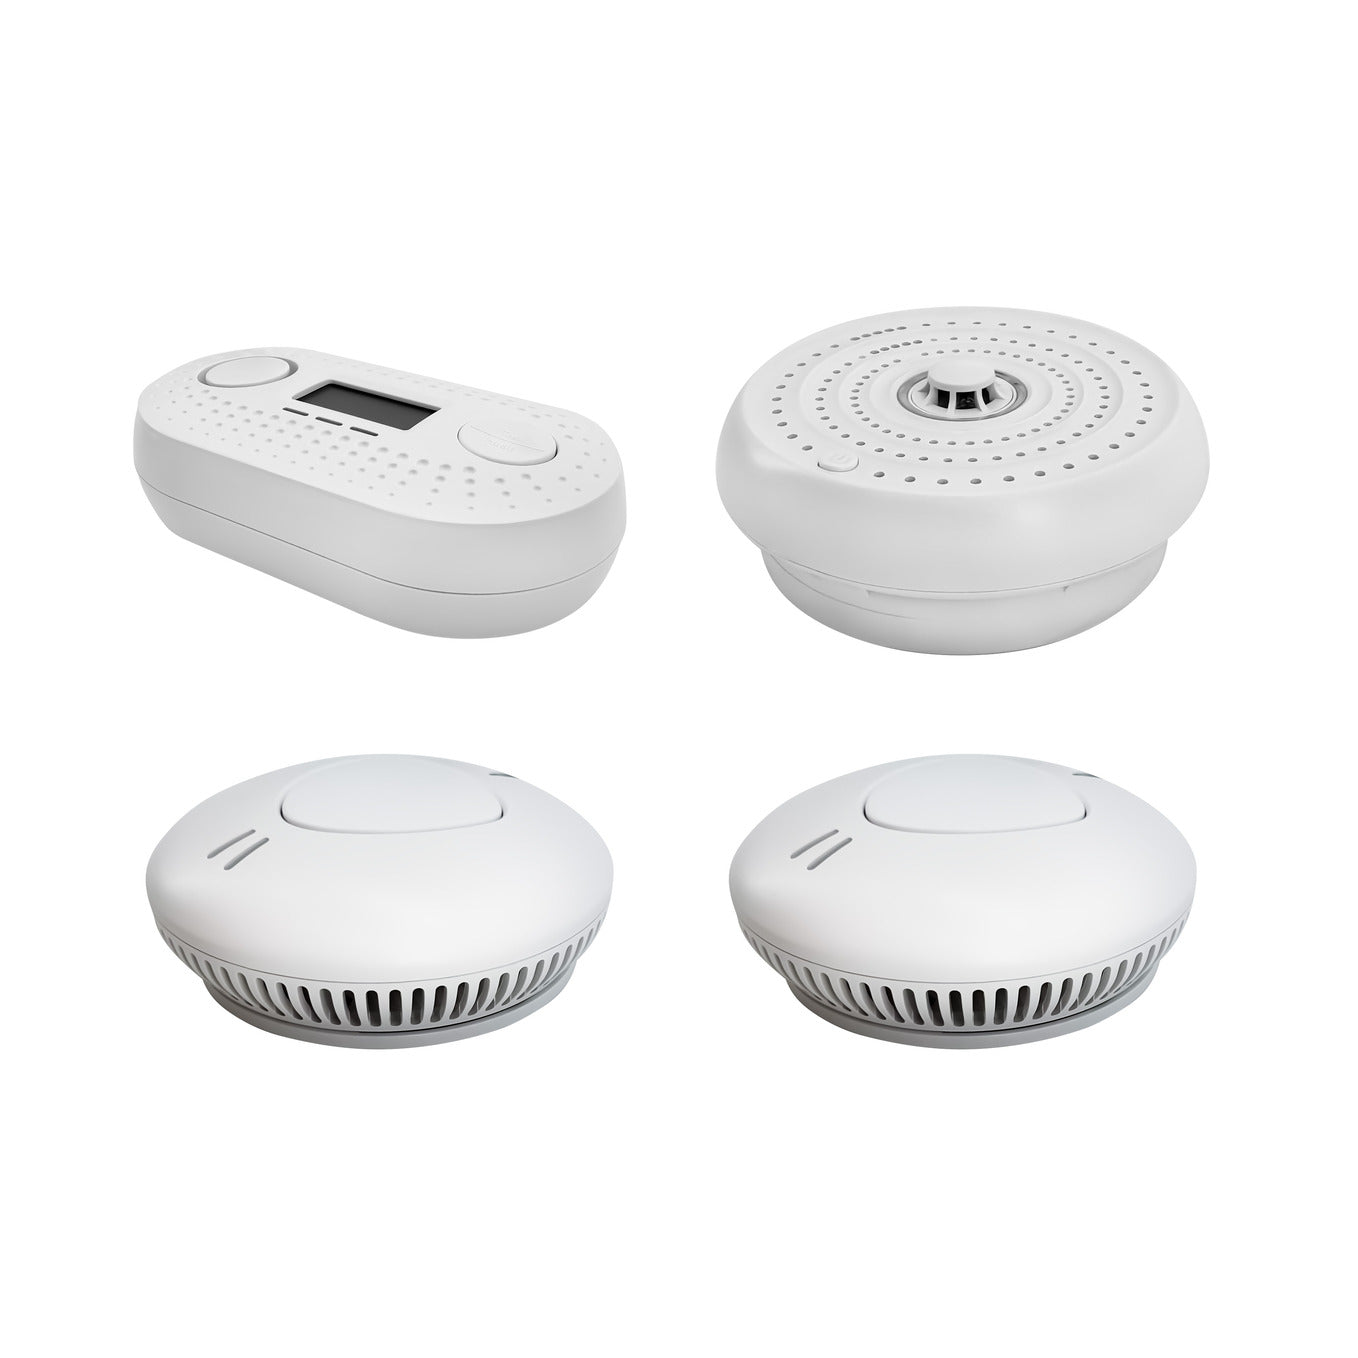 Firexo 4 Unit Interlinked Optical Smoke Alarm, Heat Alarm, and Carbon Monoxide Alarm Multipack with 10 Year Tamper Proof Battery, White. 2x Smoke Alarm, 1x Heat Alarm, 1x Carbon Monoxide alarm